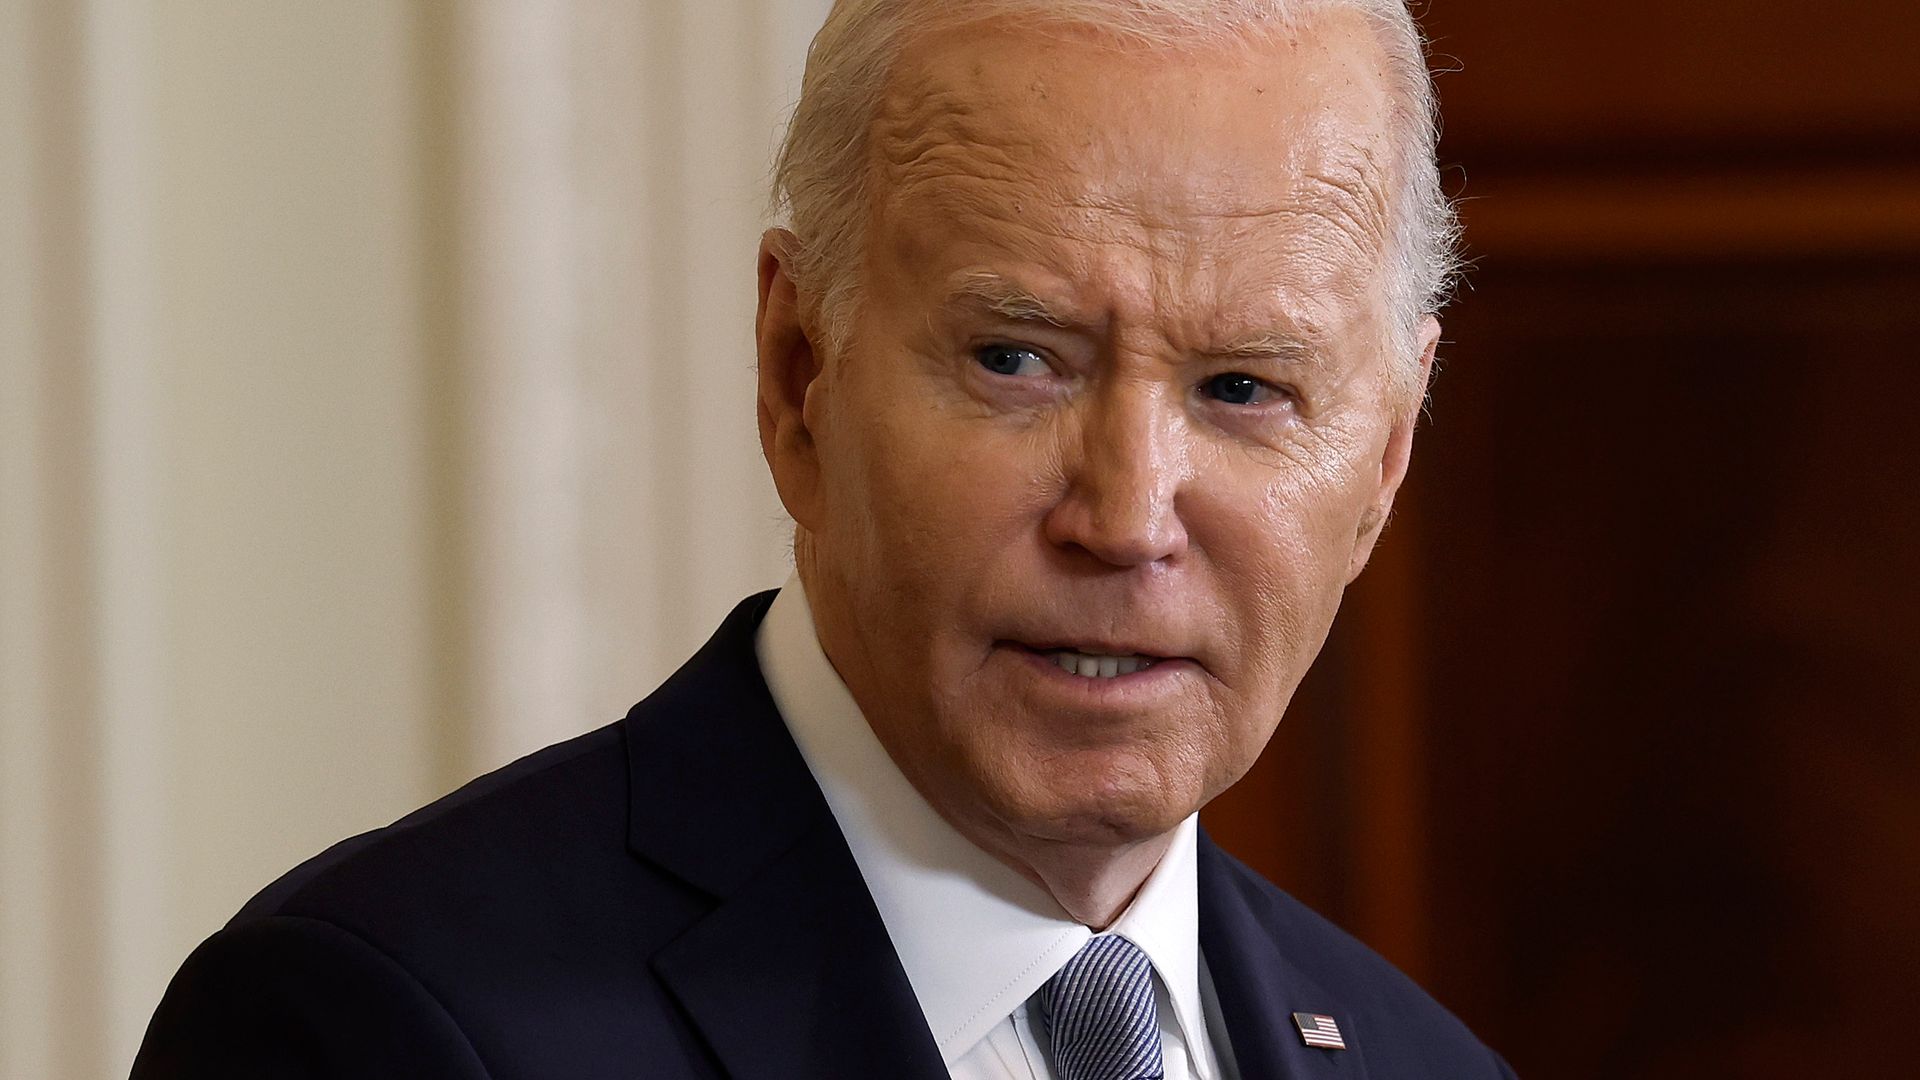 The Democratic National Committee will officially nominate President Joe Biden through a “virtual roll call” vote ahead of its convention.